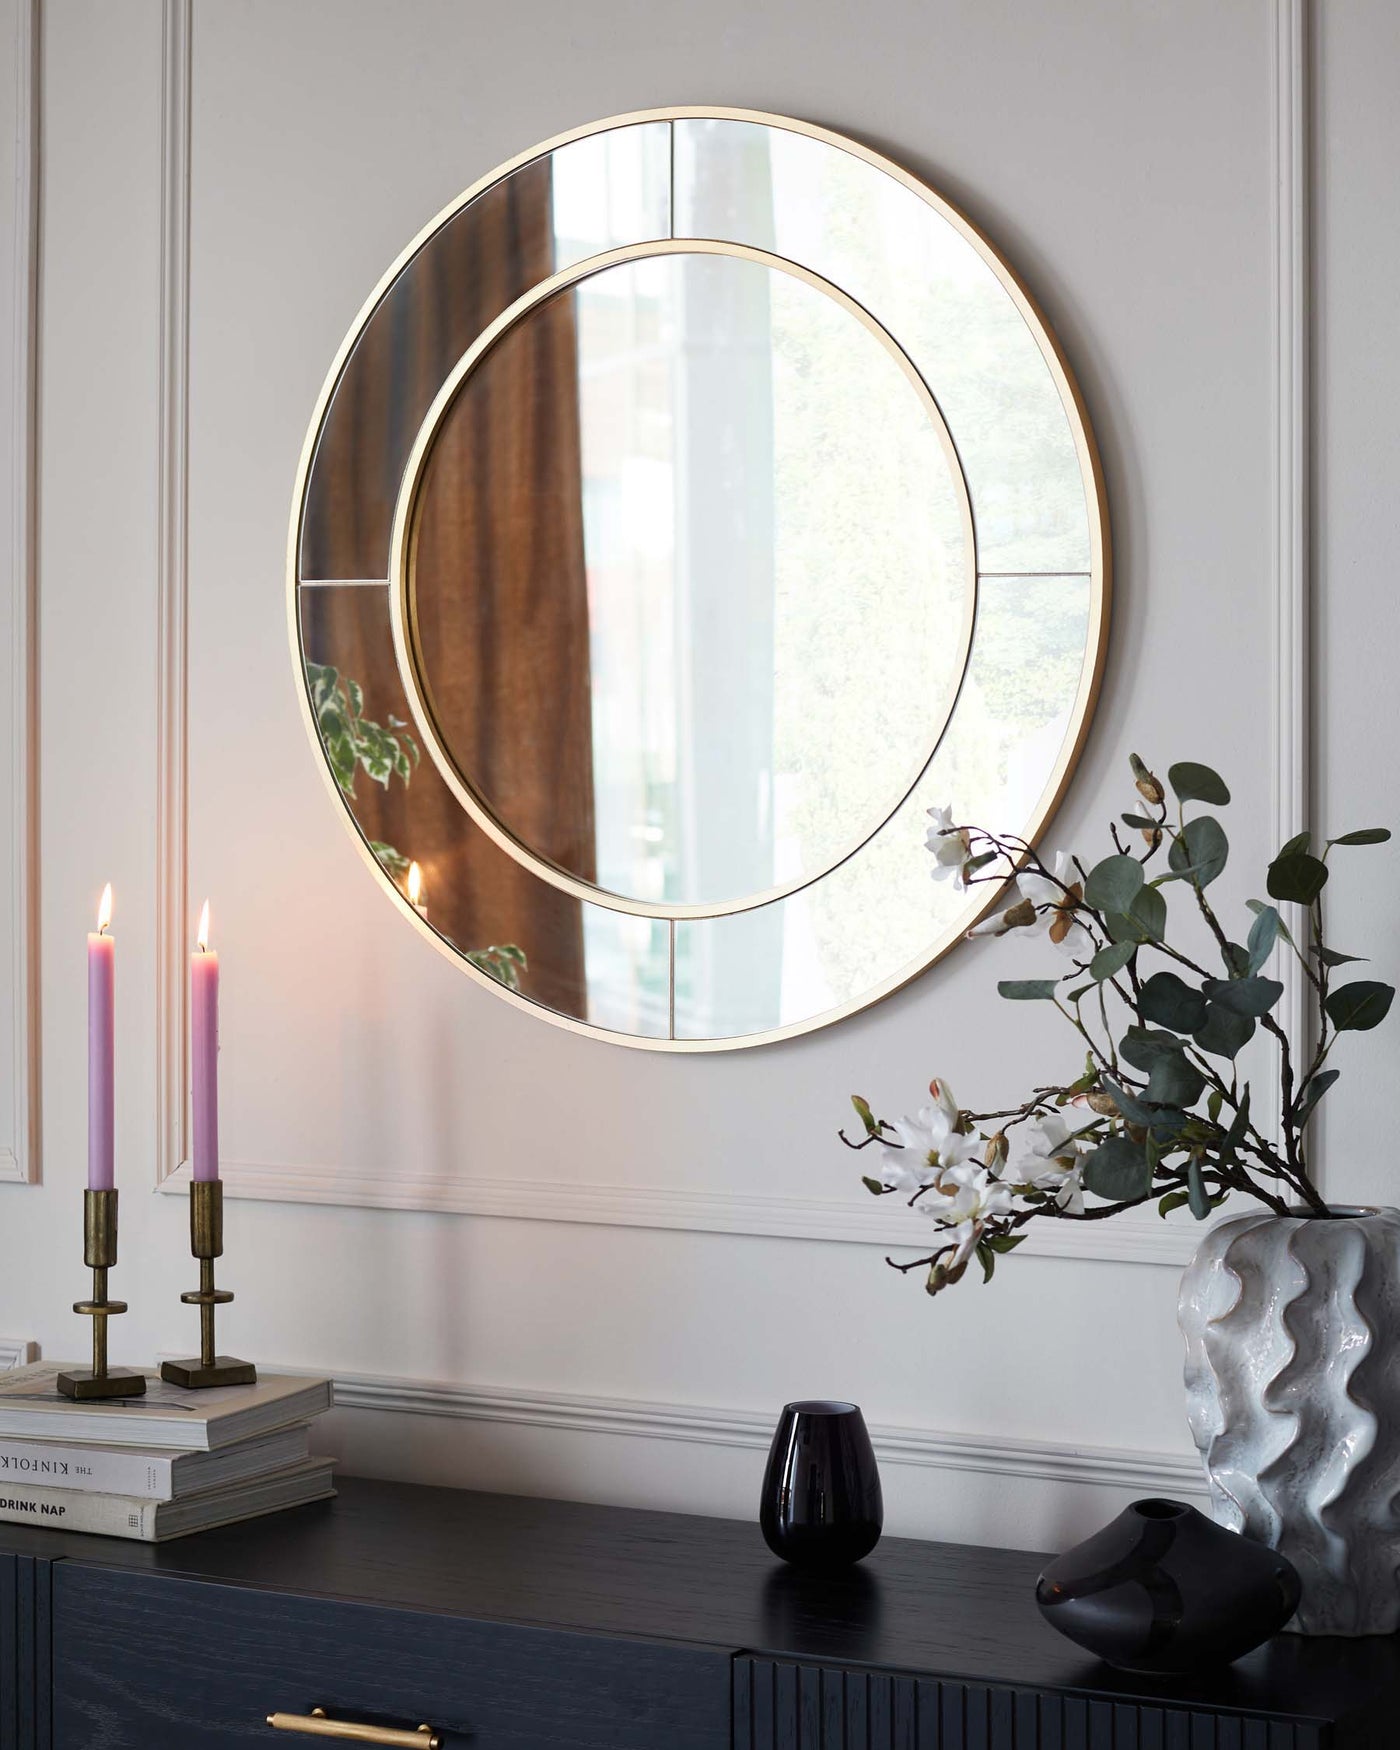 Elegant dark-toned wooden sideboard with brass handles, featuring a textured front design, complemented by a large round mirror with a slim golden frame mounted above it.